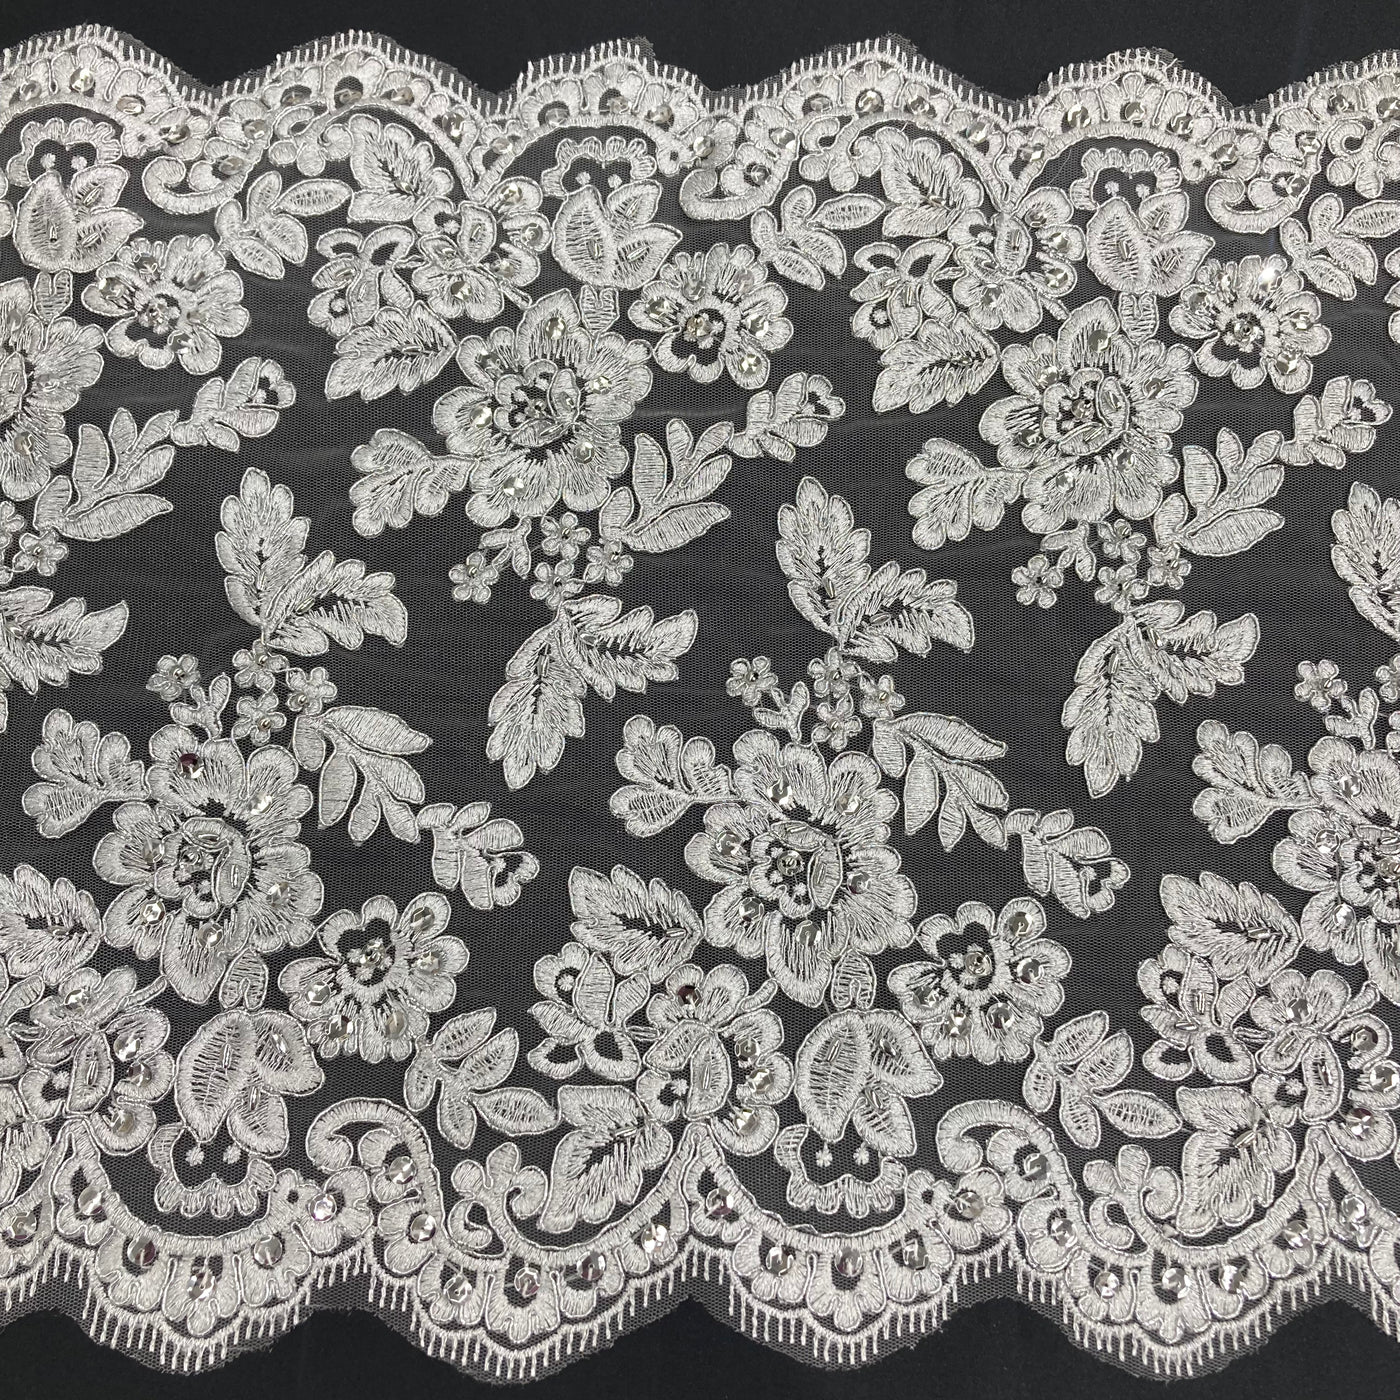 Double Sided Lace Trimming Beaded Corded Embroidered on 100% Polyester Net Mesh | Lace USA